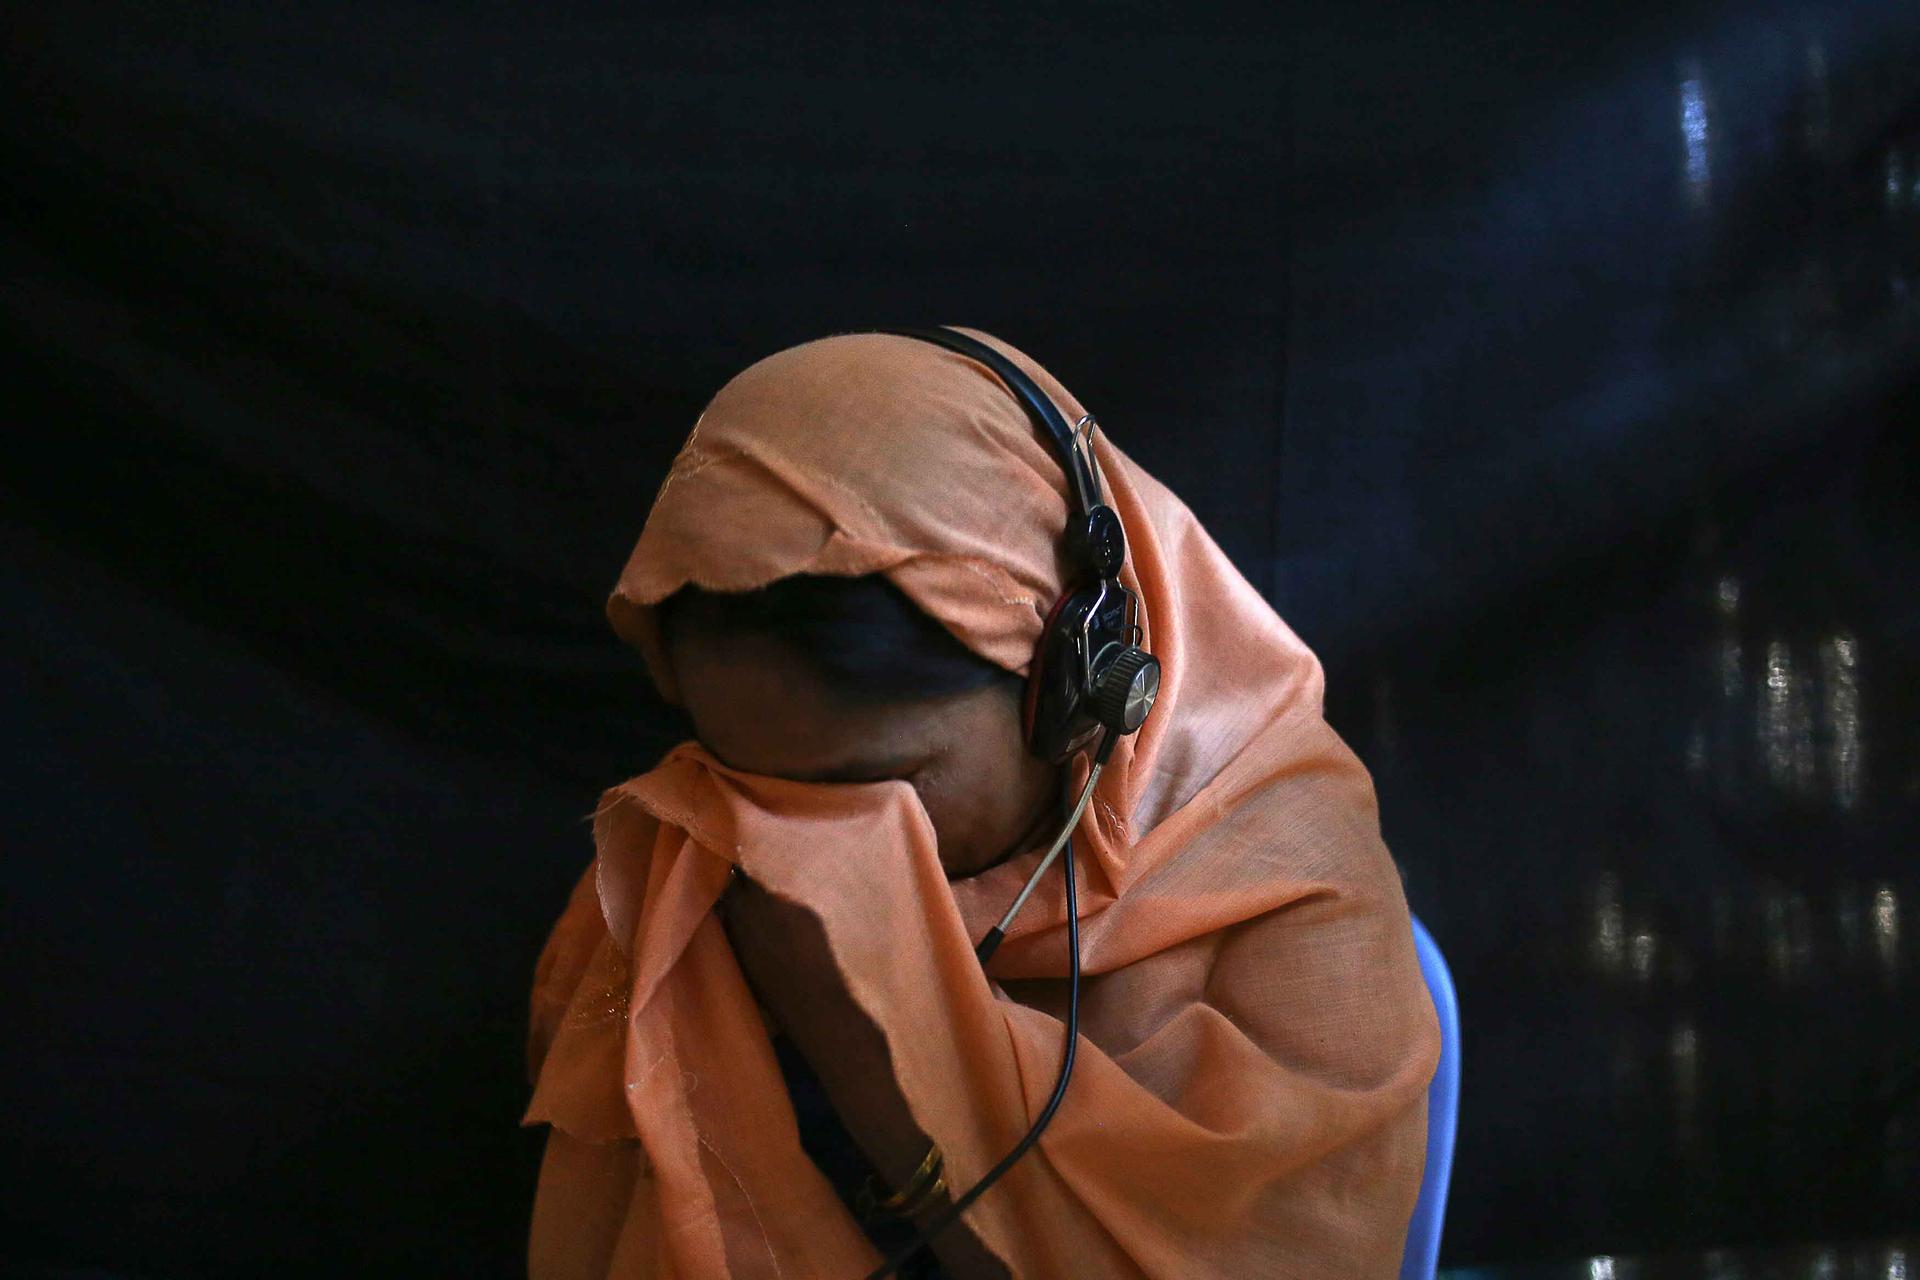 Rahana, a 32-year-old Rohingya, cries as she talks with traffickers from an Internet hut. She has already sent $1,100 to the trafficker who is holding her 12-year-old son ransom at a camp along the Thailand-Malaysia border. The trafficker wants another $3